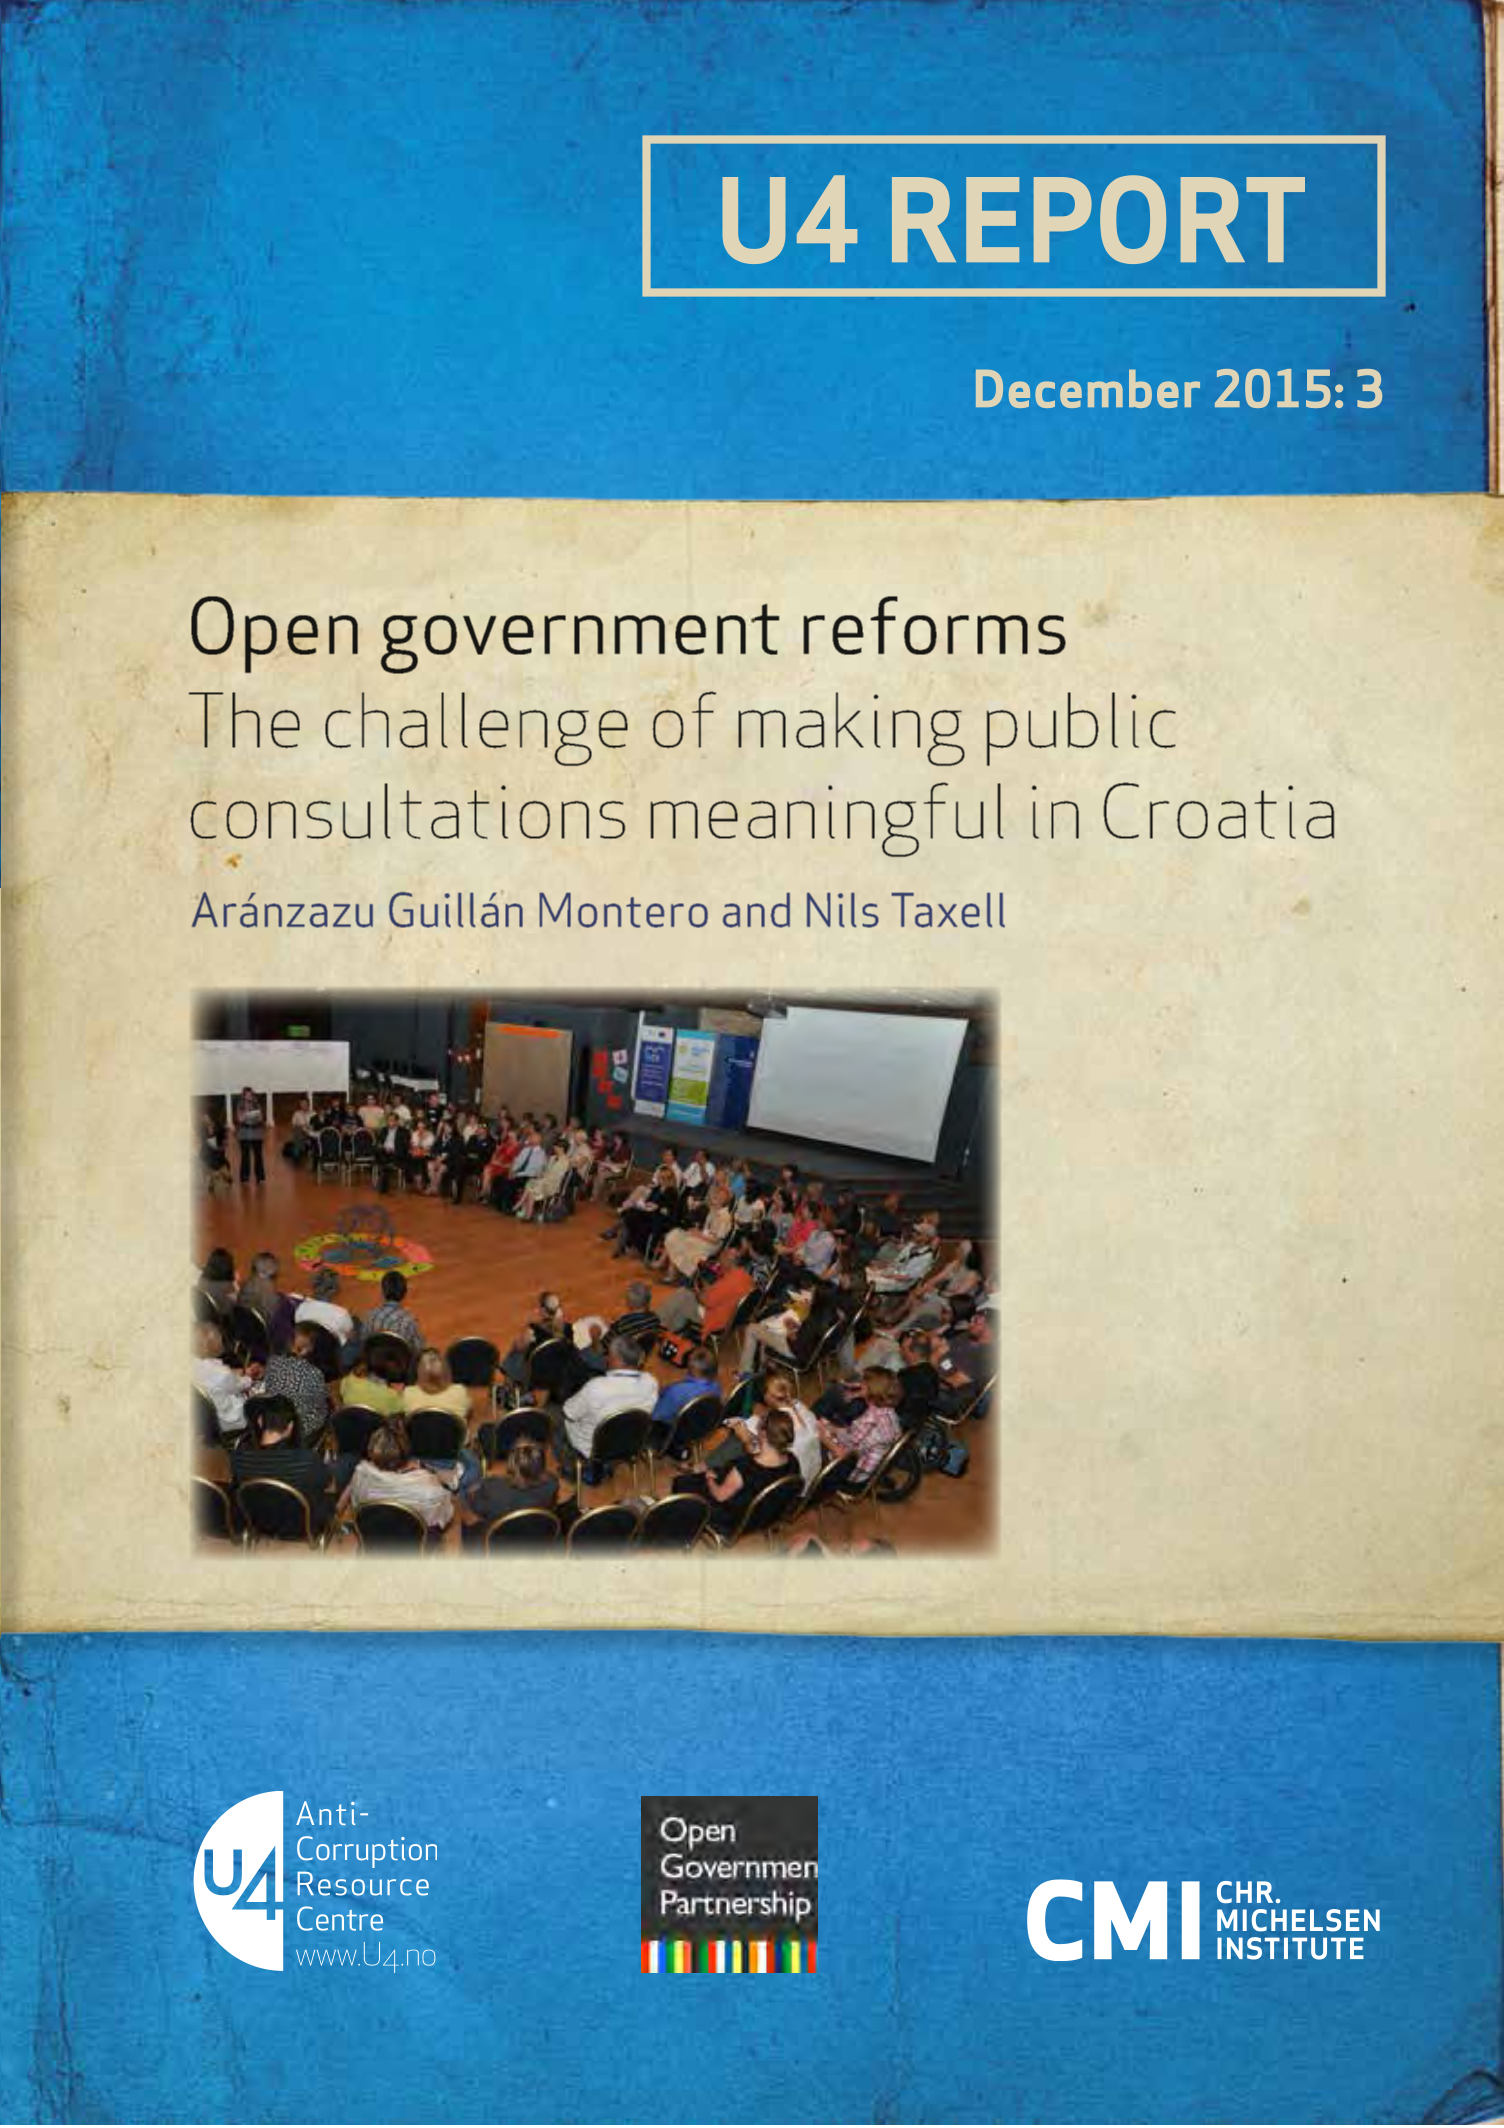 Open government reforms: The challenge of making public consultations meaningful in Croatia